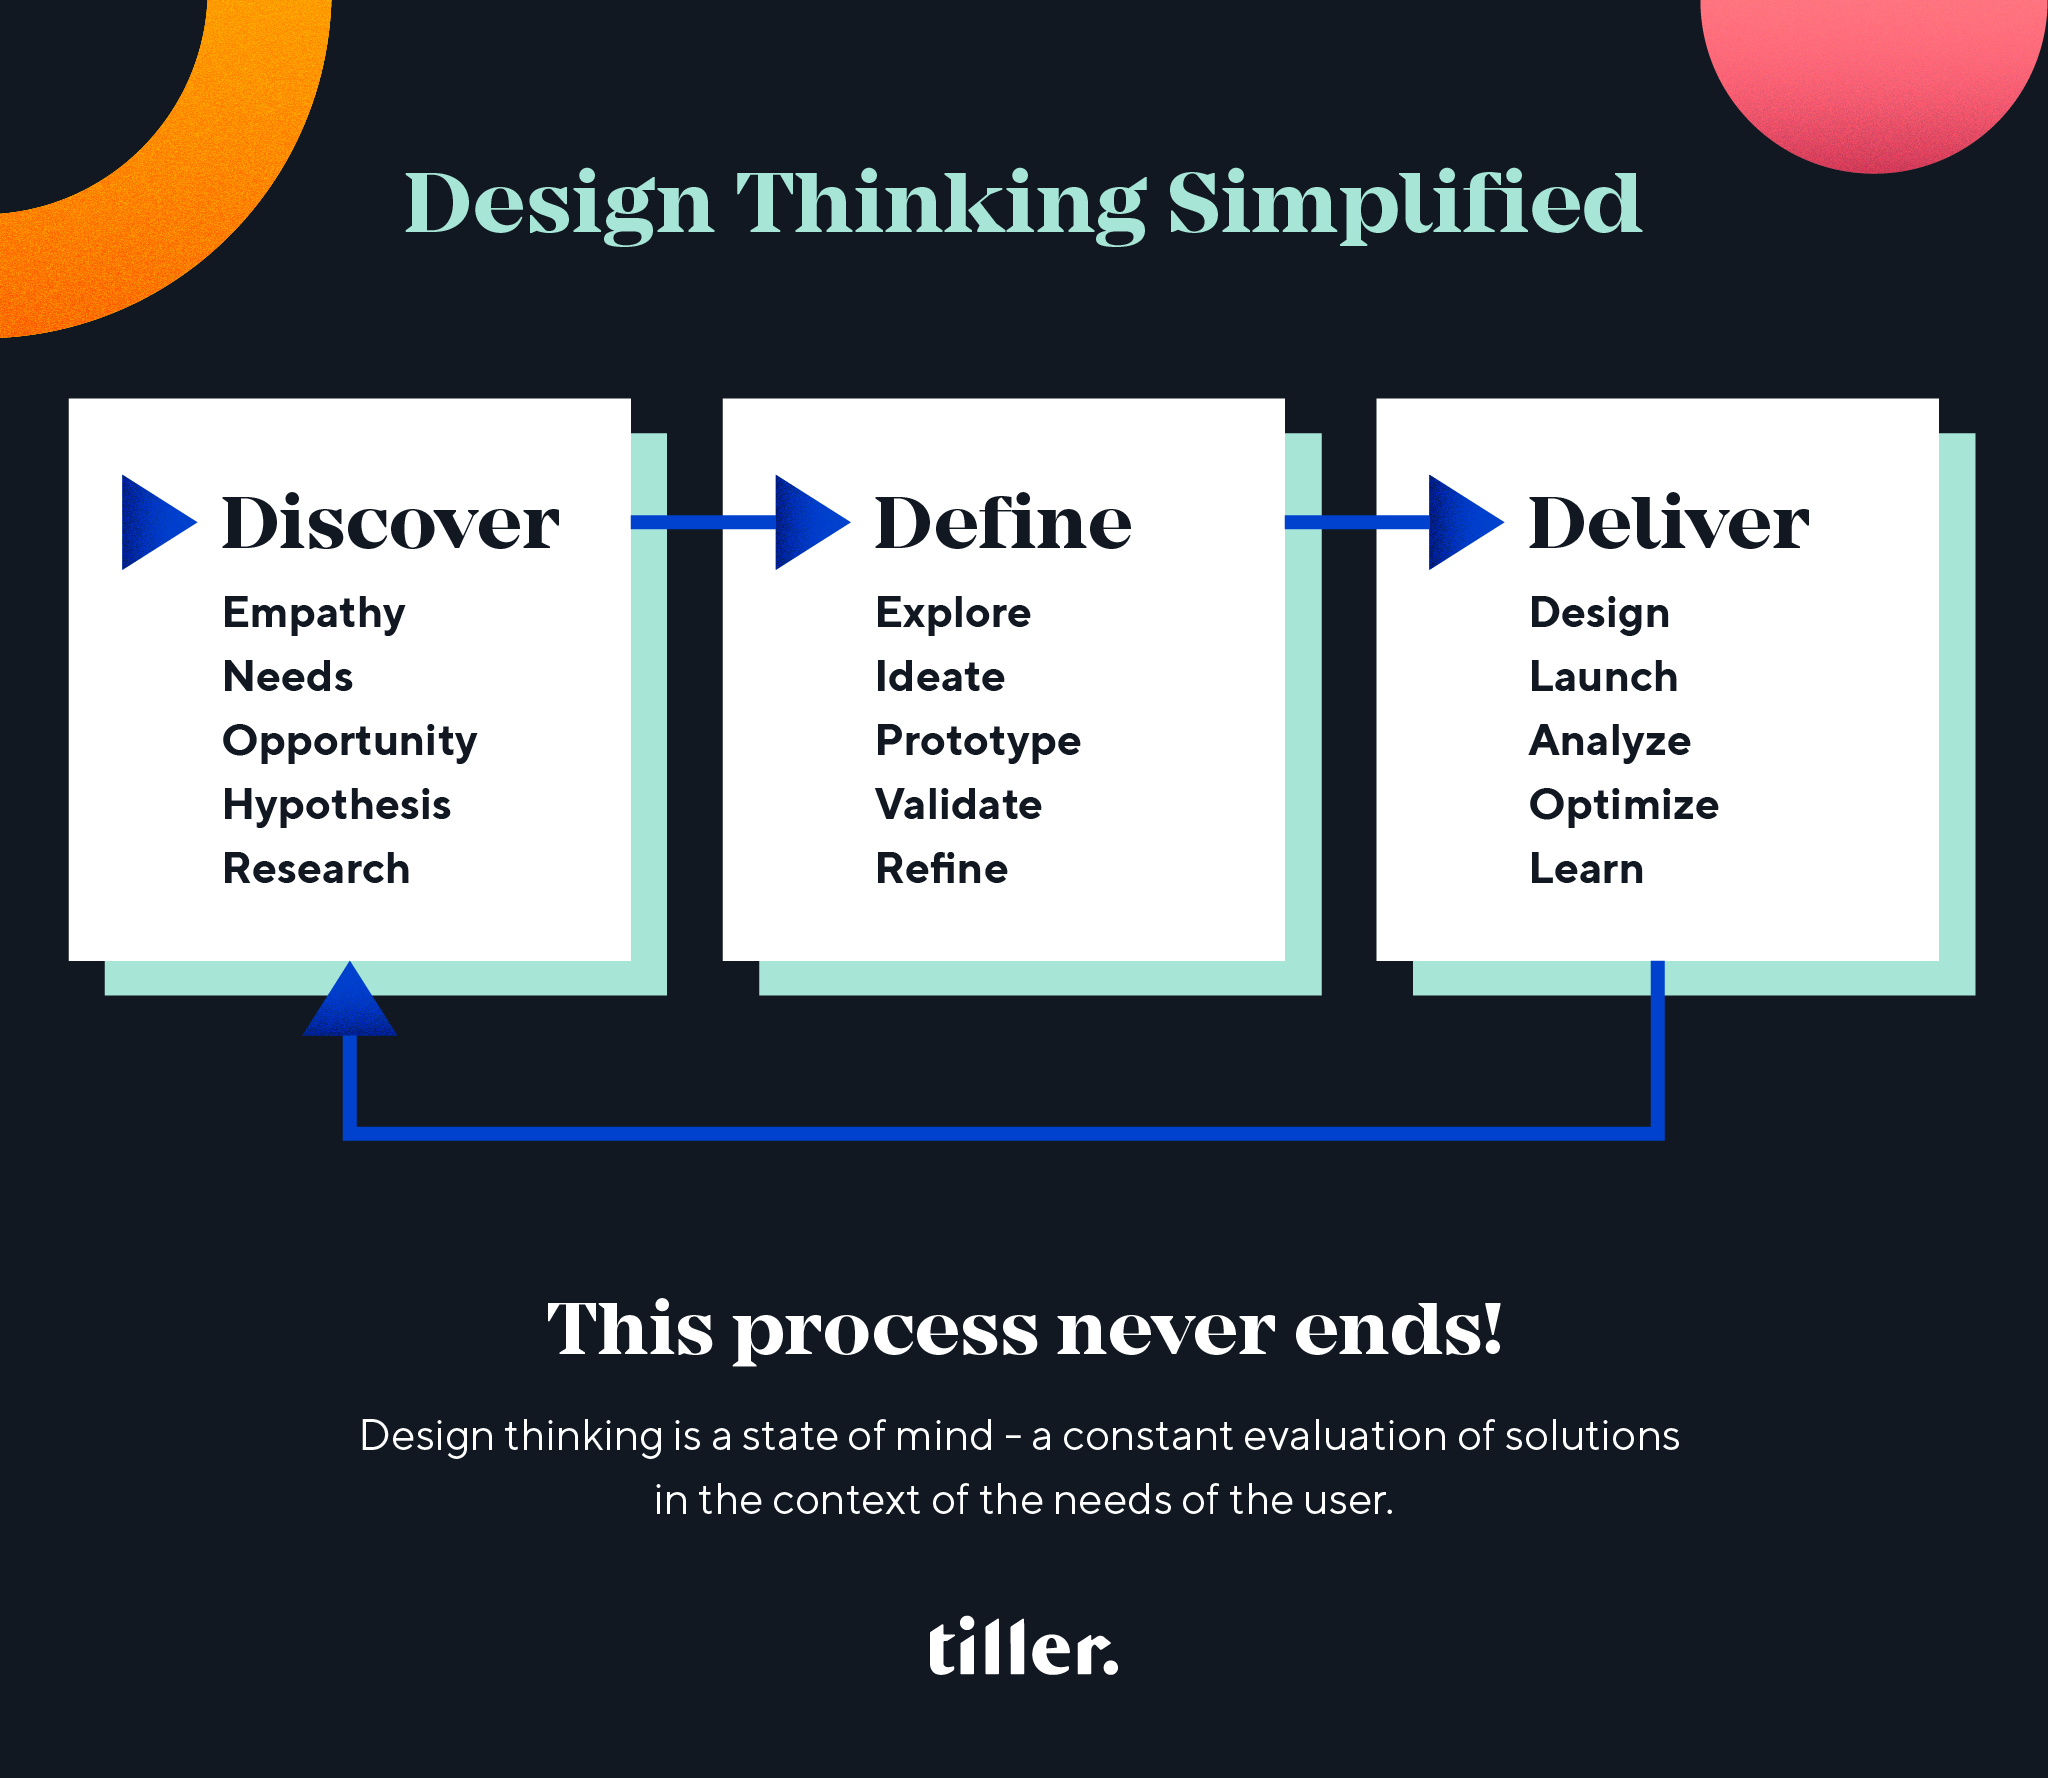 Graphic showing high-level design thinking